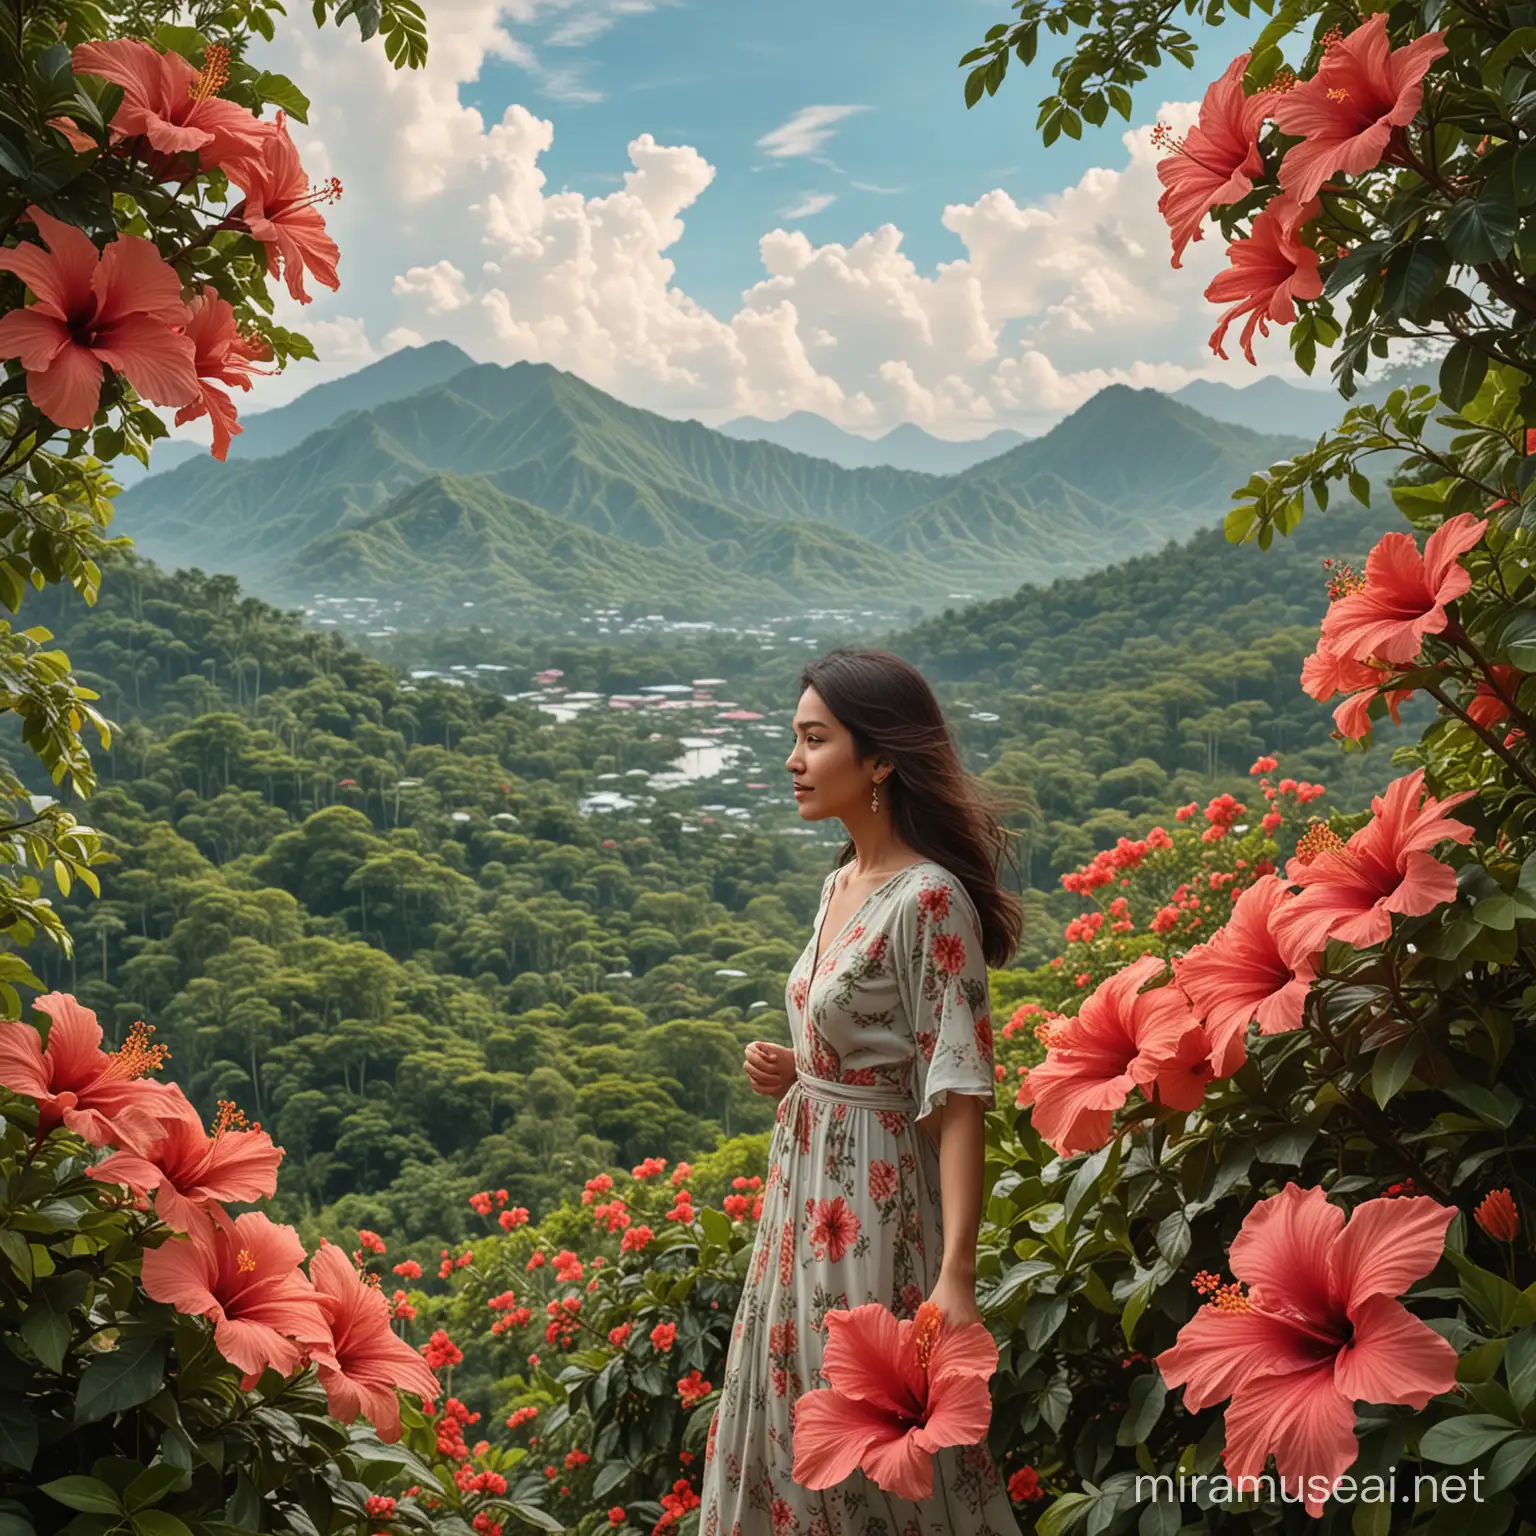 Raya Surrounded by Lush Malaysian Landscapes and Hibiscus Flowers